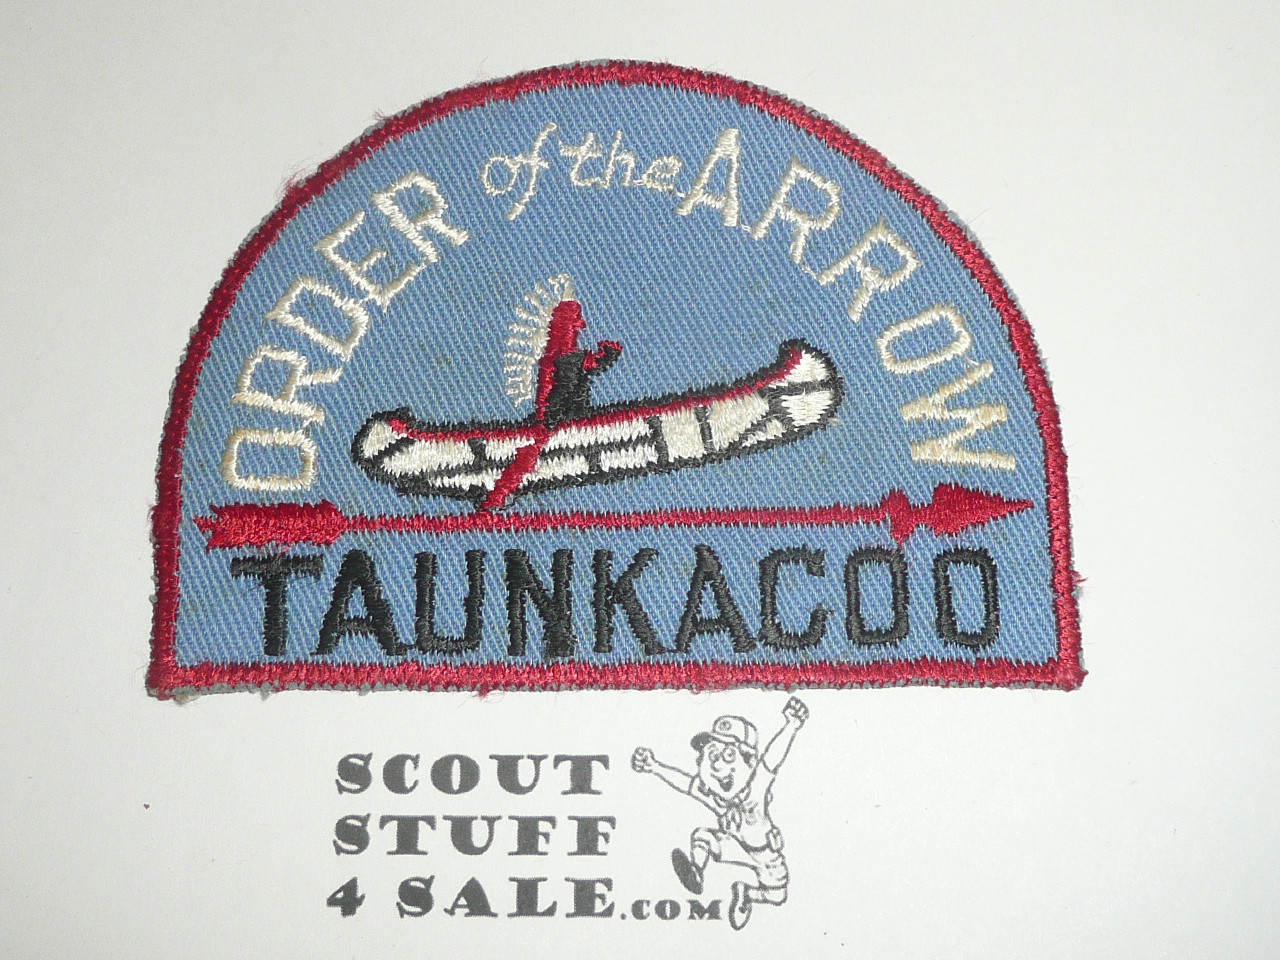 Order of the Arrow Lodge #487 Taunkacoo x2a Patch